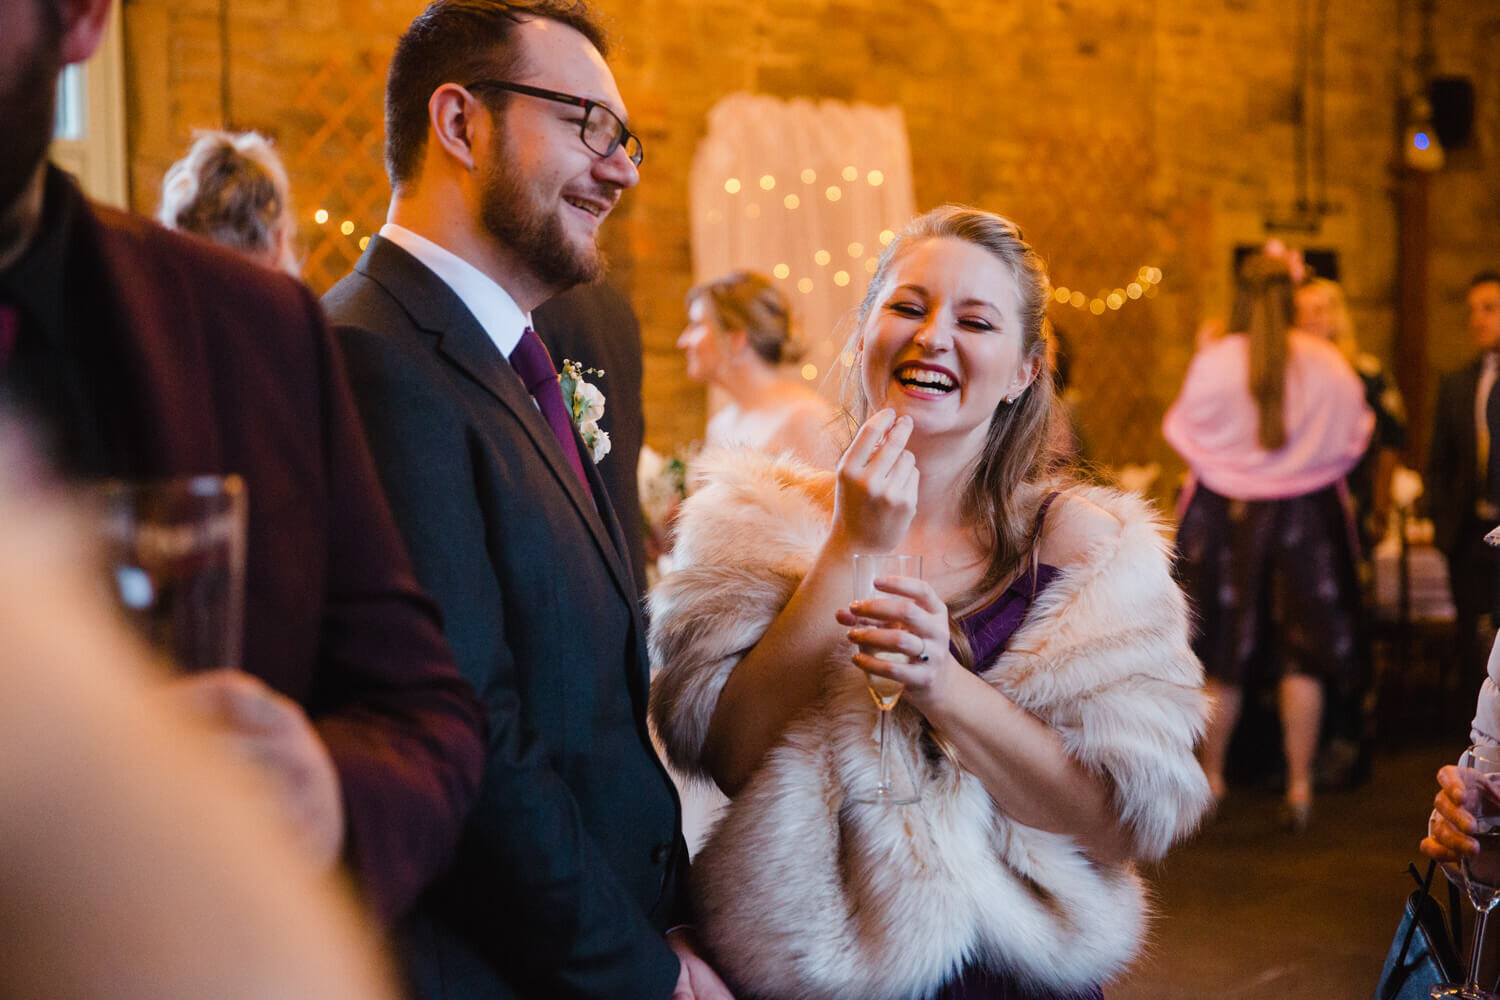 bridesmaid laughs at guests joke after wedding ceremony concludes